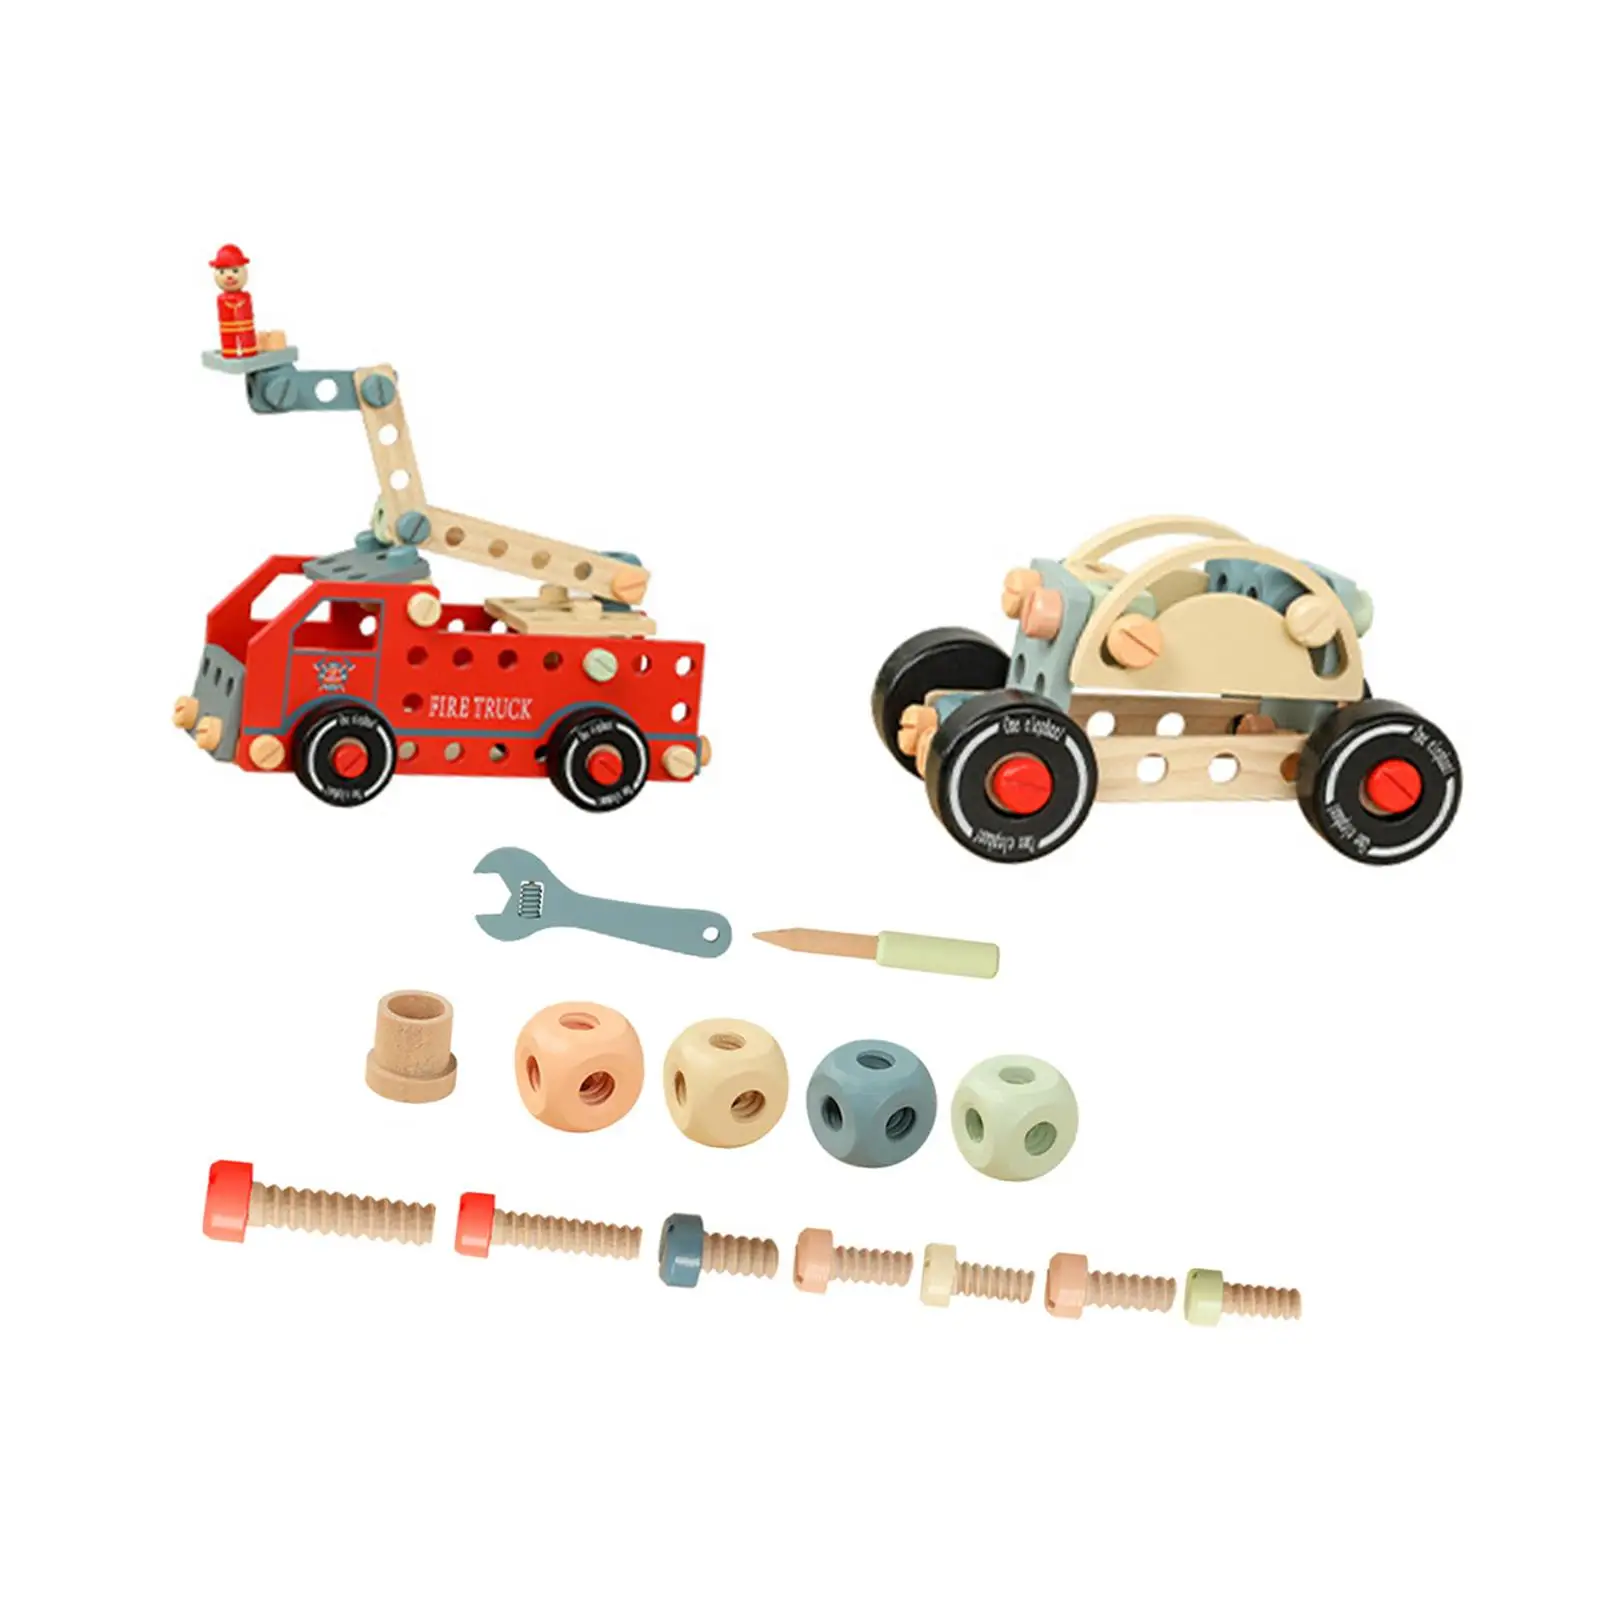 Kids Construction Toy Set Montessori Basic Skills Pretend Game Toolbox Wooden Nut Tool for Education Activities Role Play Indoor